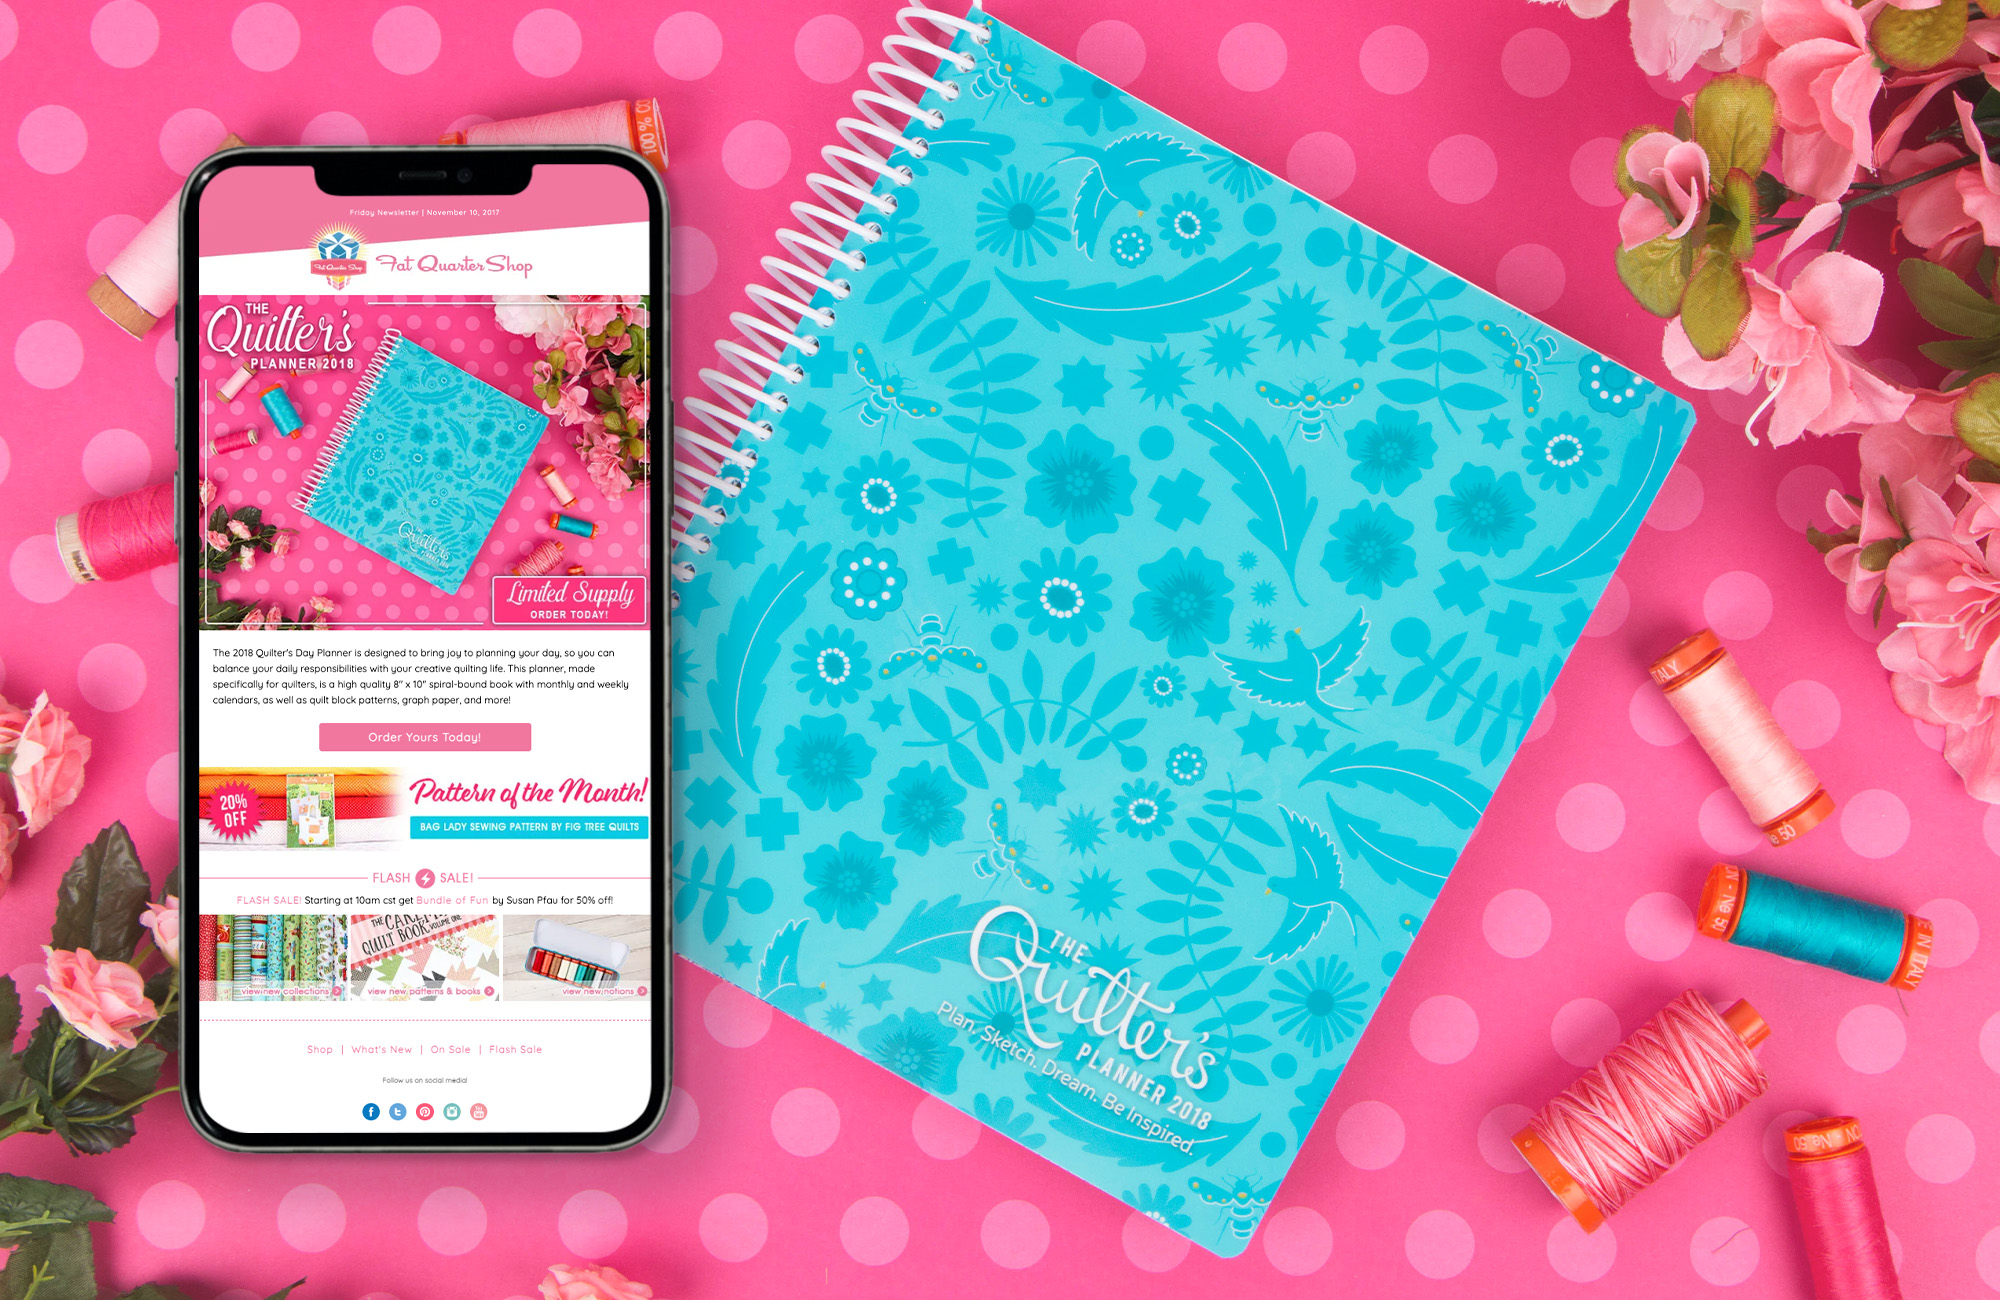 A blue coil-bound planner with a floral pattern on the cover. The book is sitting on a pink polka-dotted background and is surrounded by vibrant spools of thread and pink flowers. A phone is superimposed on top of the image, displaying an email that features the image behind to market this 2018 Quilters Planner. 